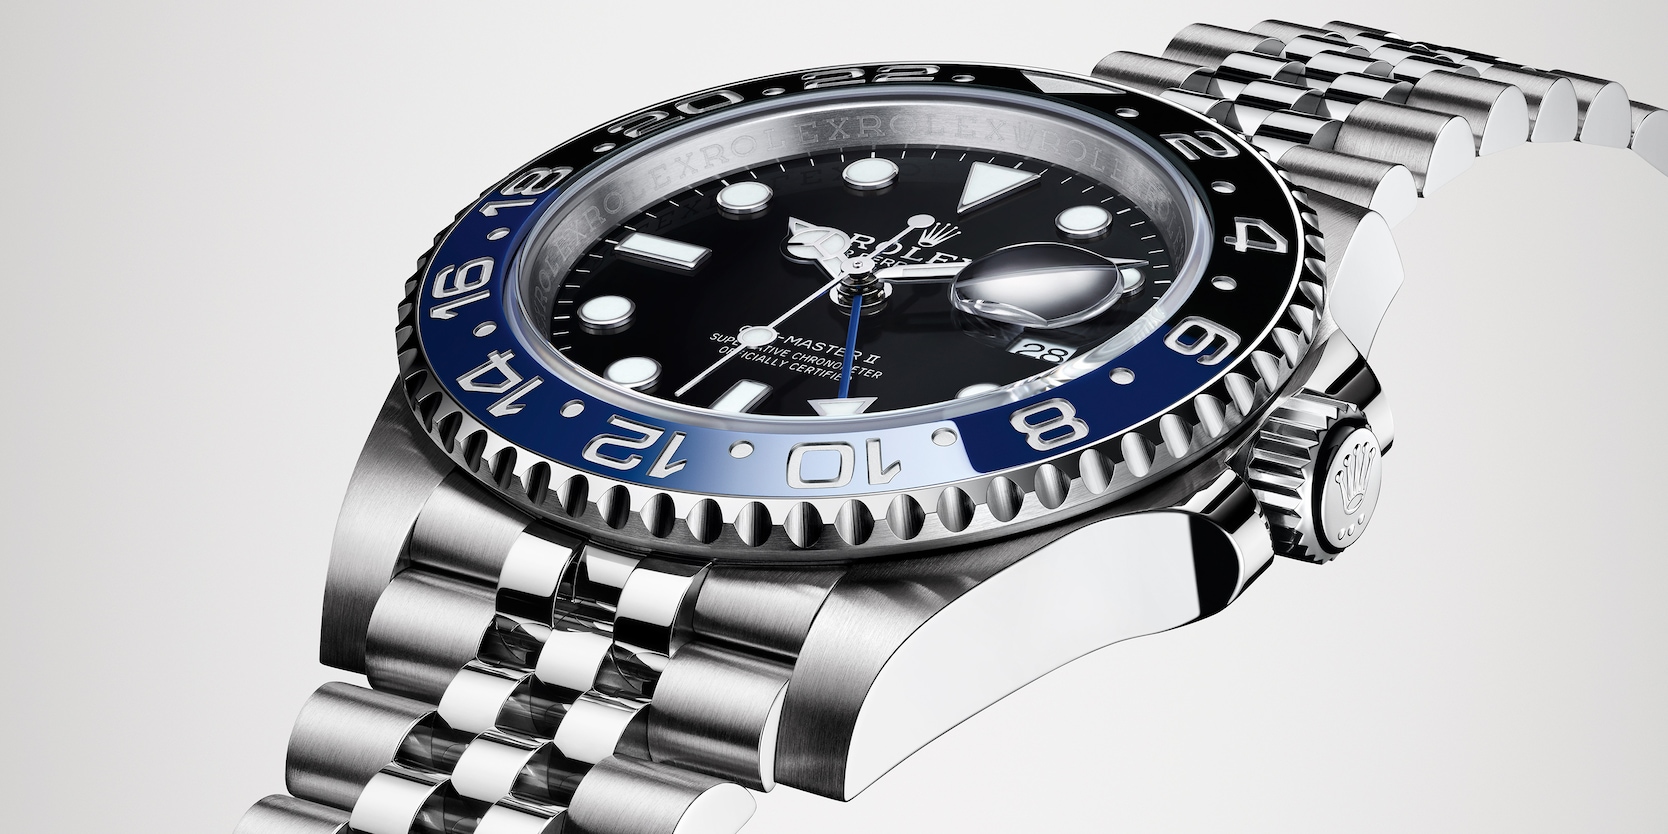 https://content.rolex.com/dam/watches/family-pages/gmt-master-ii/roller-design/professional-watches-gmt-master-ii-blue-black-bezel_m126710blnr_0002_1901ac_006.jpg?imwidth=1440